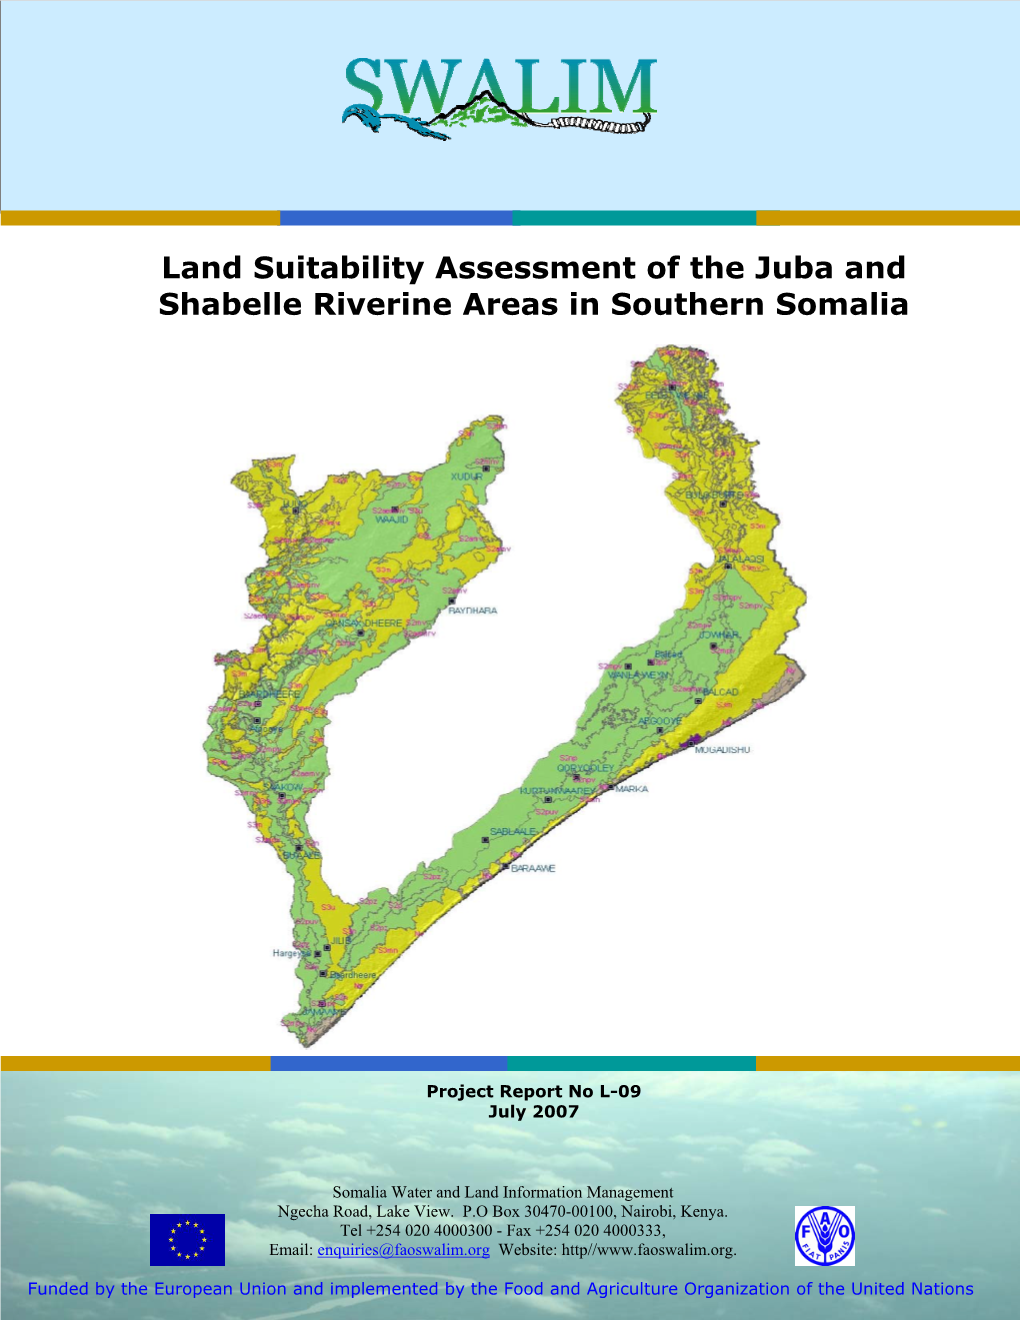 Land Suitability Assessment of the Juba and Shabelle Riverine Areas in Southern Somalia